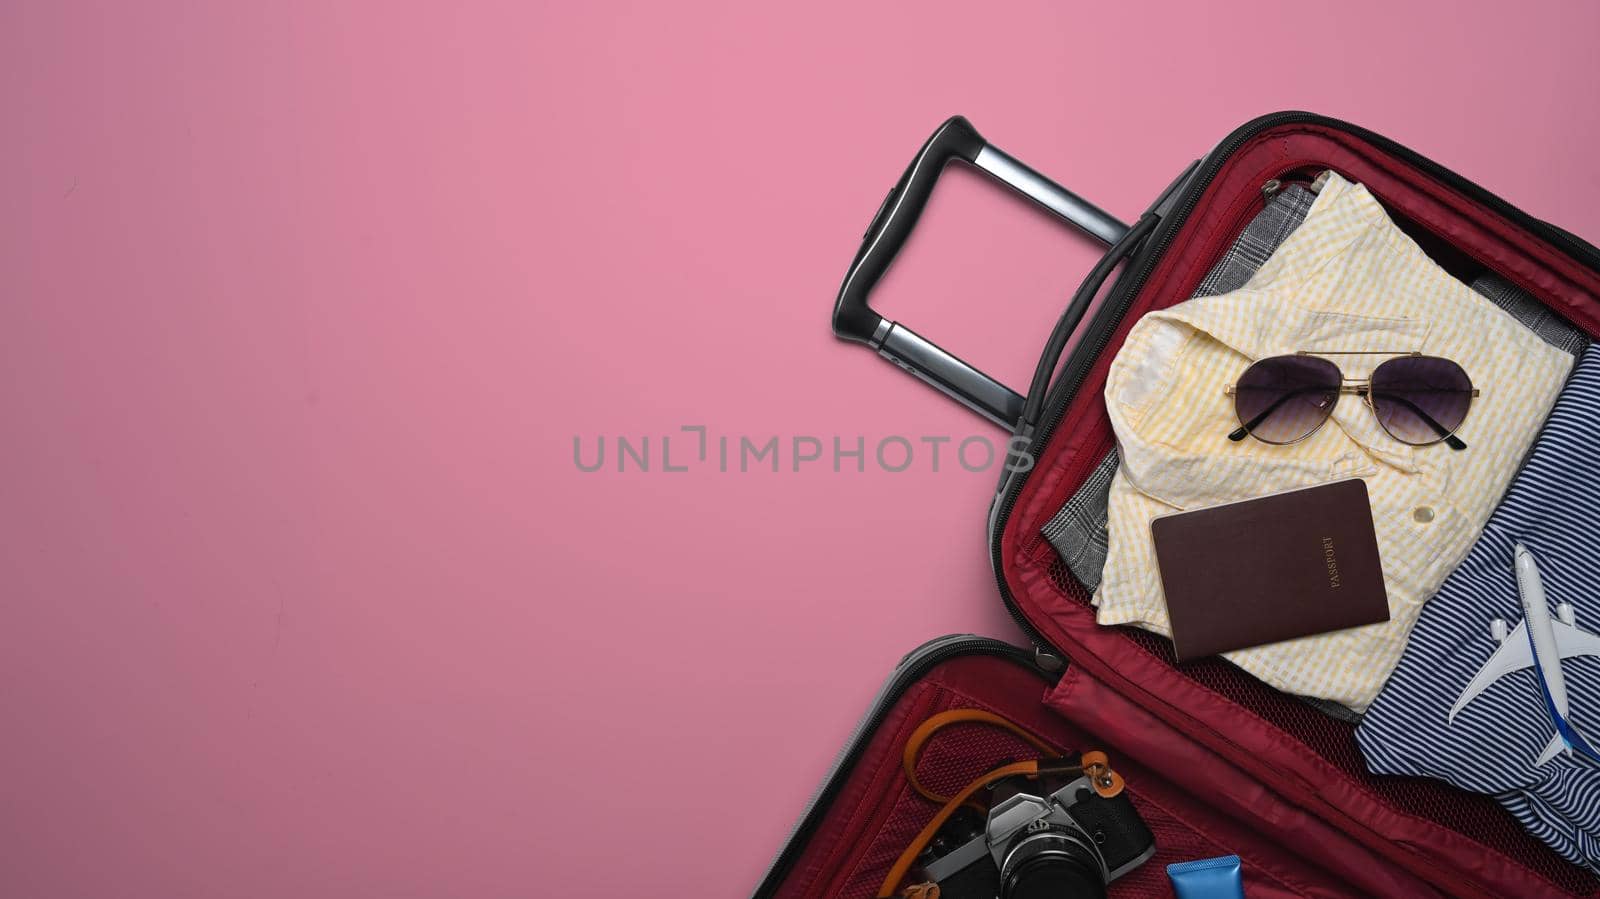 Open suitcase with sunglasses, camera, passport and clothes on pink background. Preparing for the summer vacations.